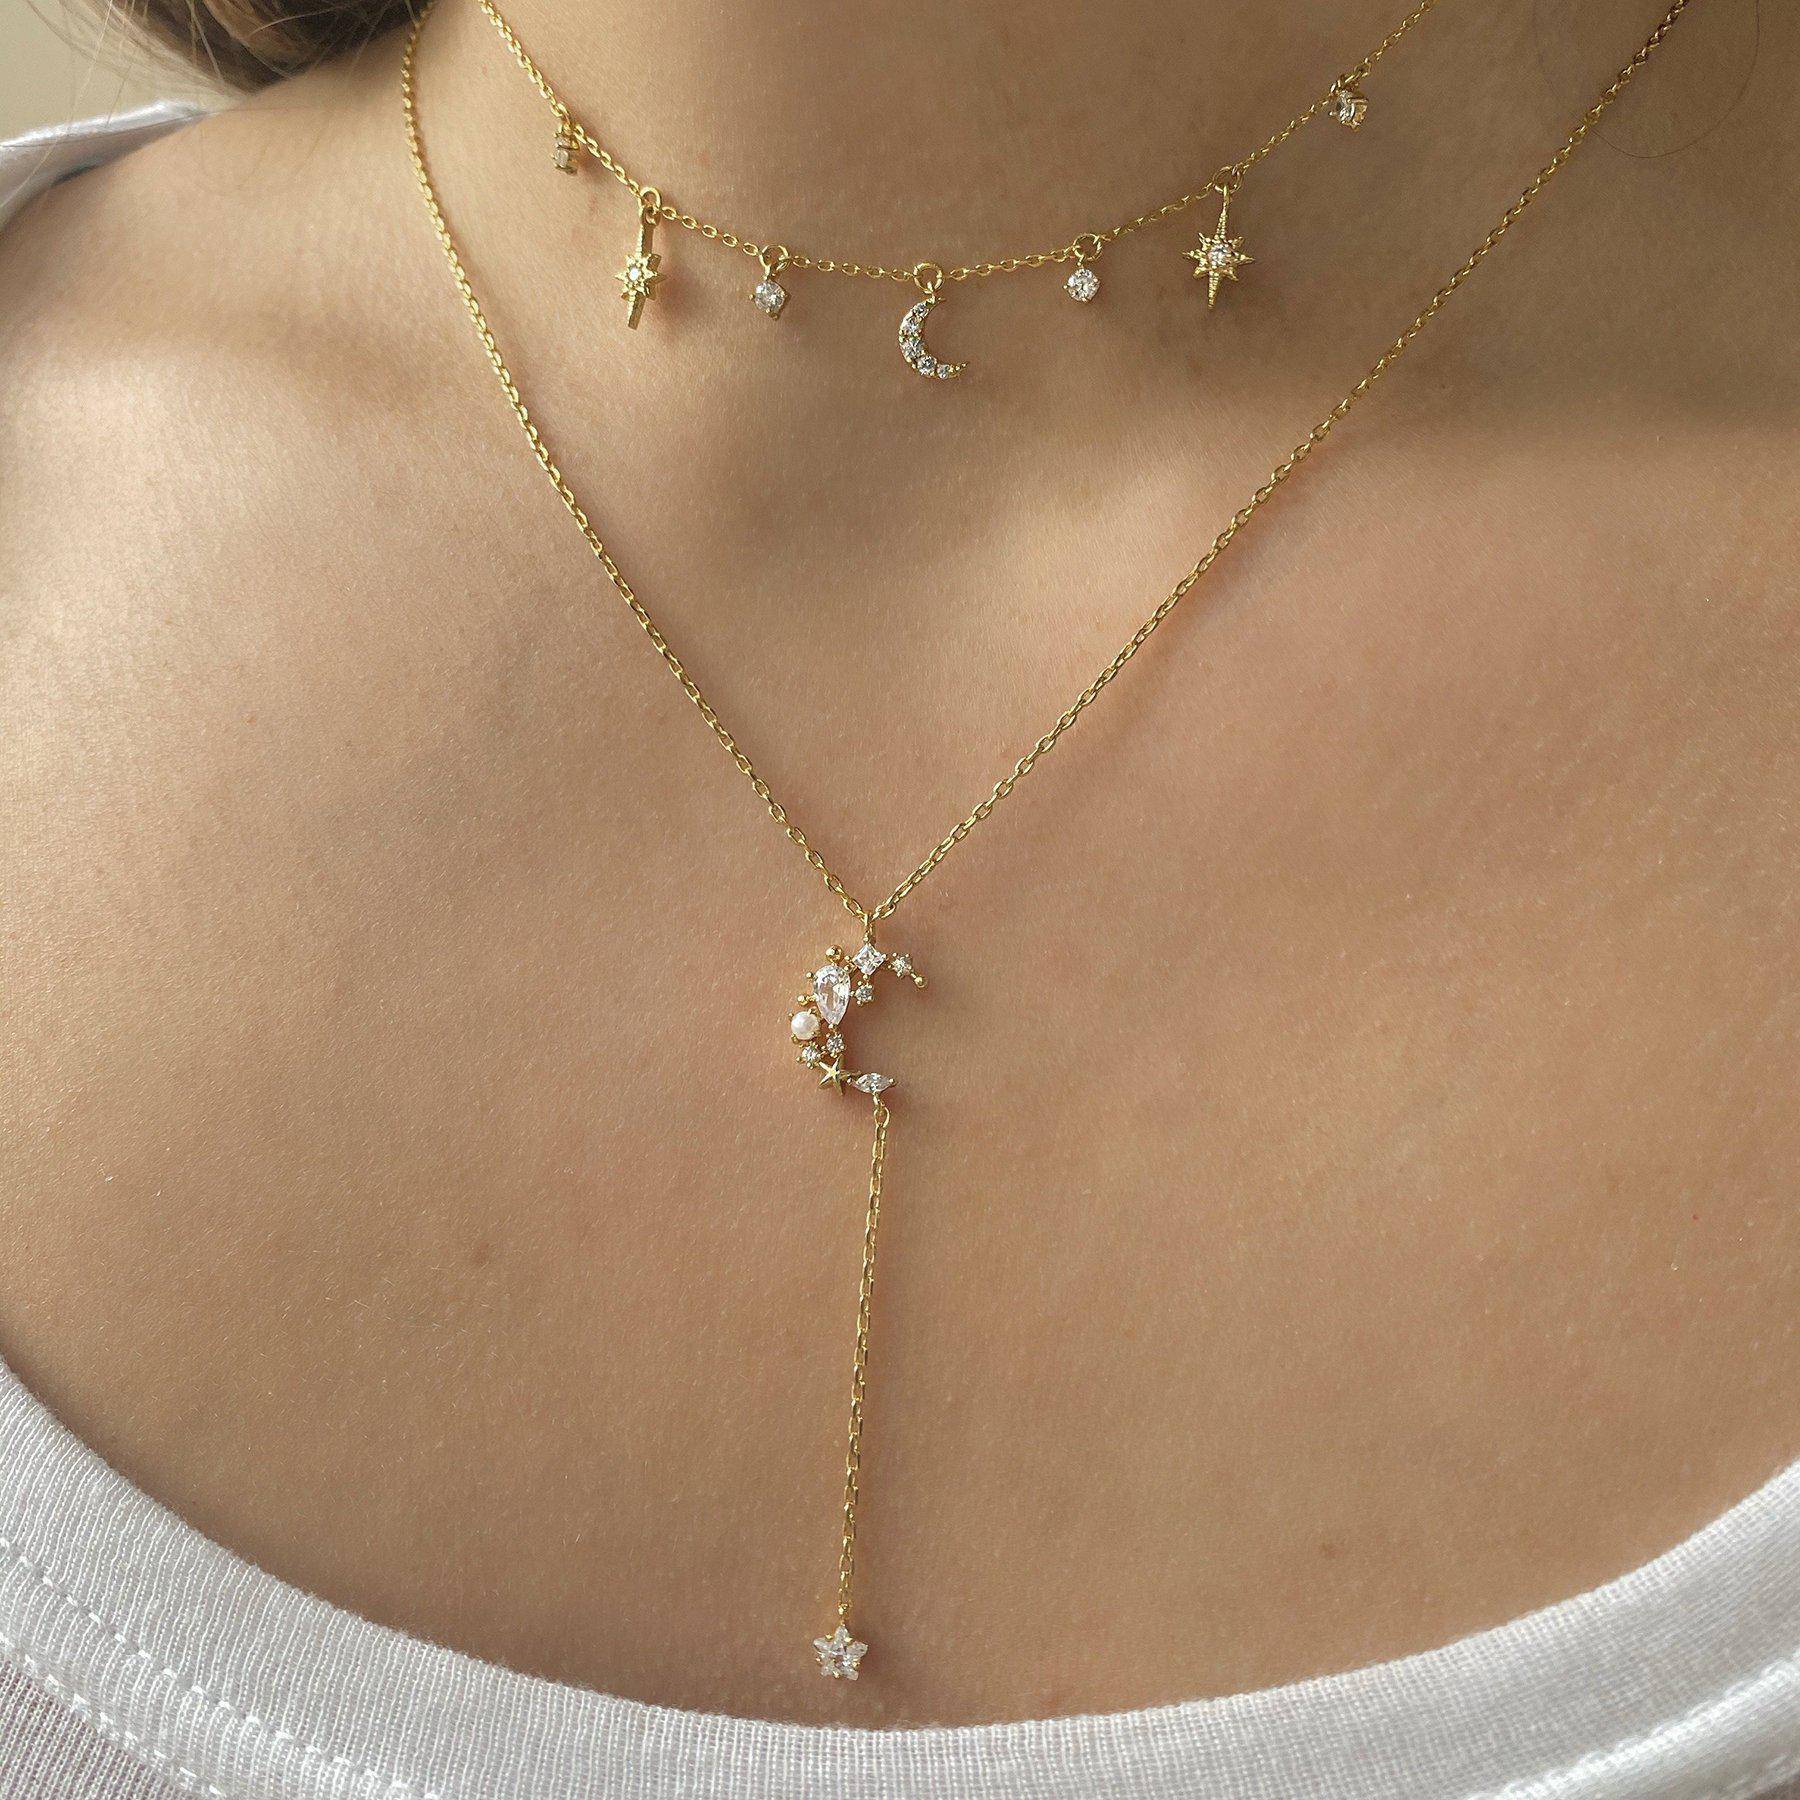 Supernova Charm Necklace - Gold - Twinkle Twinkle Little One